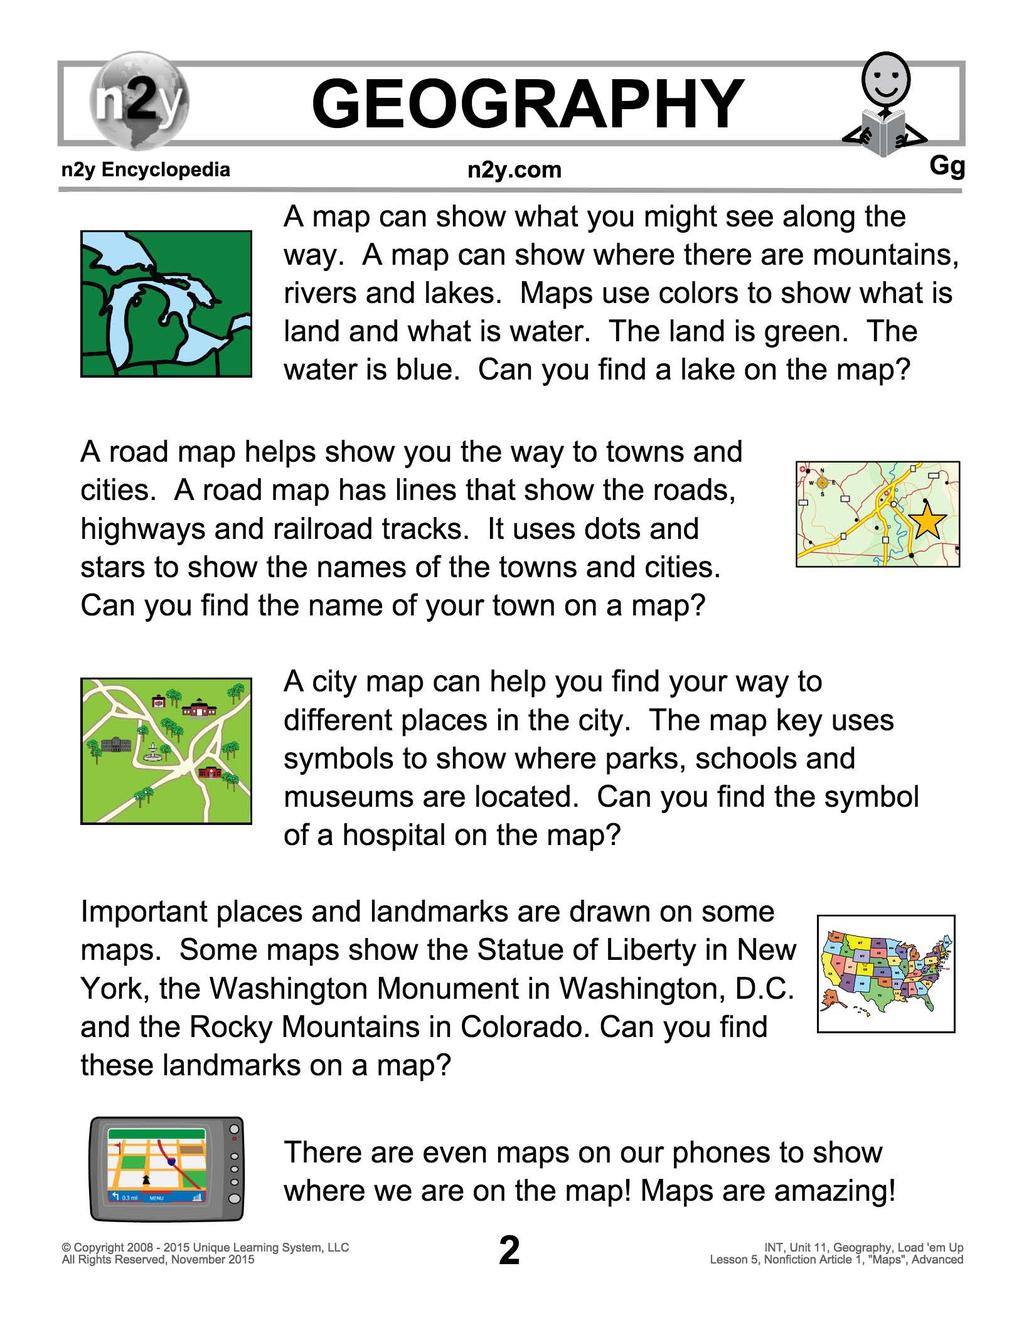 A map can show what you might see along the way. A map can show where there are mountains, rivers and lakes. Maps use colors to show what is land and what is water. The land is green.